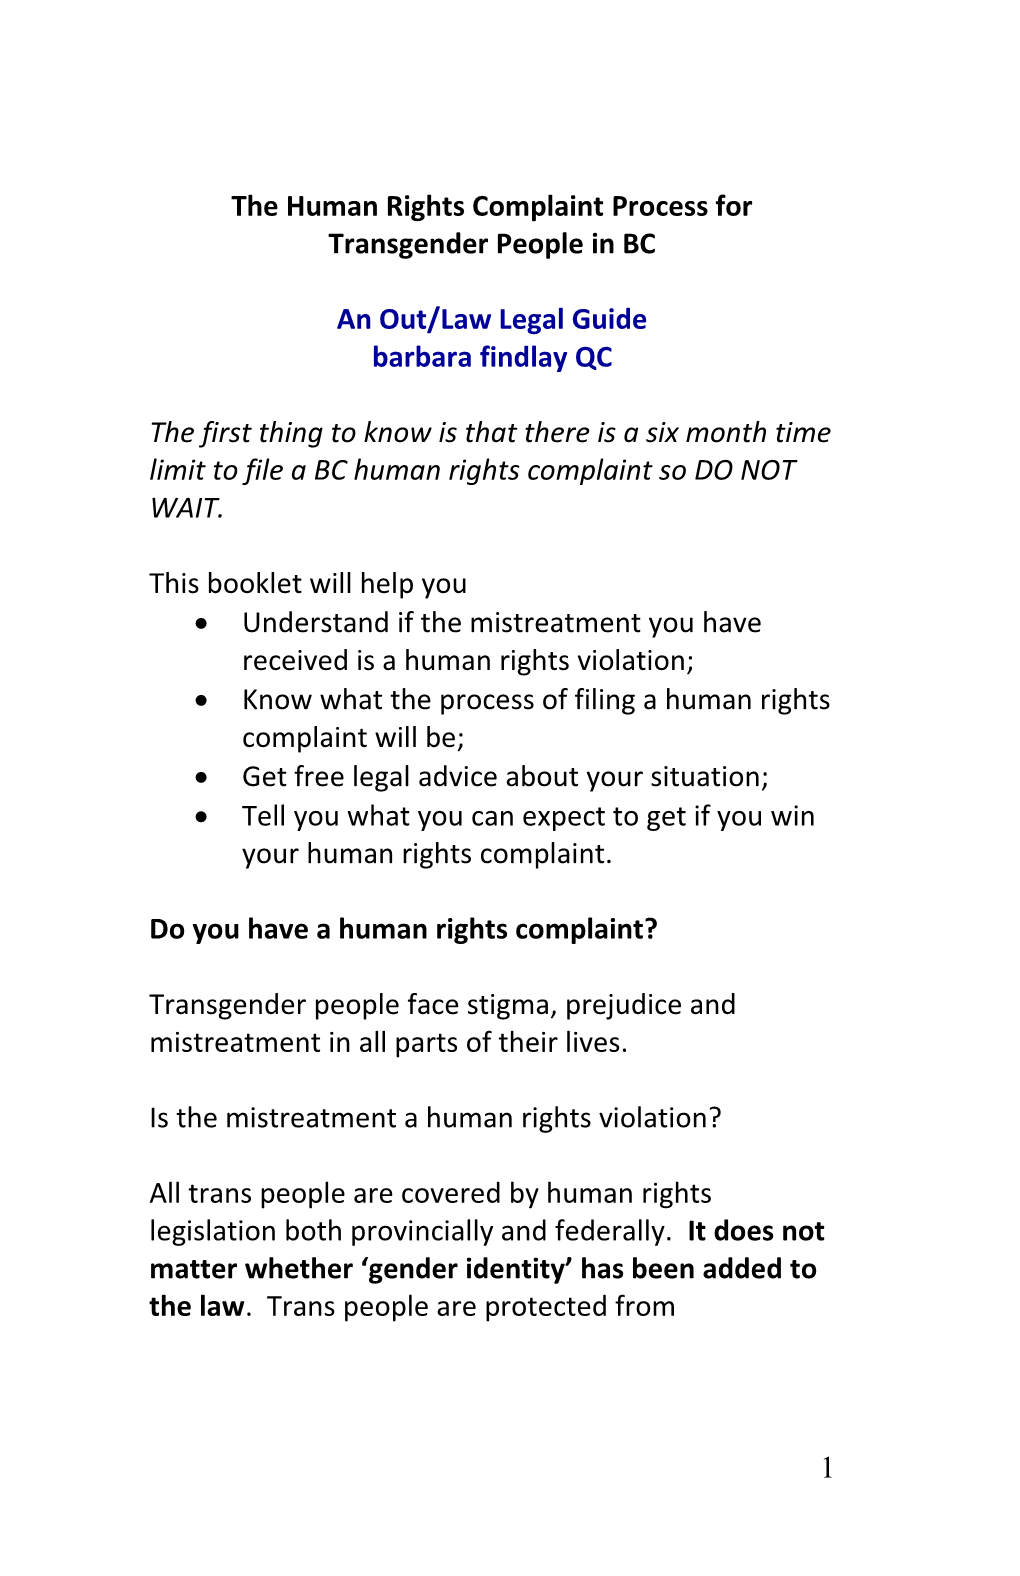 The Human Rights Complaint Process for Transgender People in B